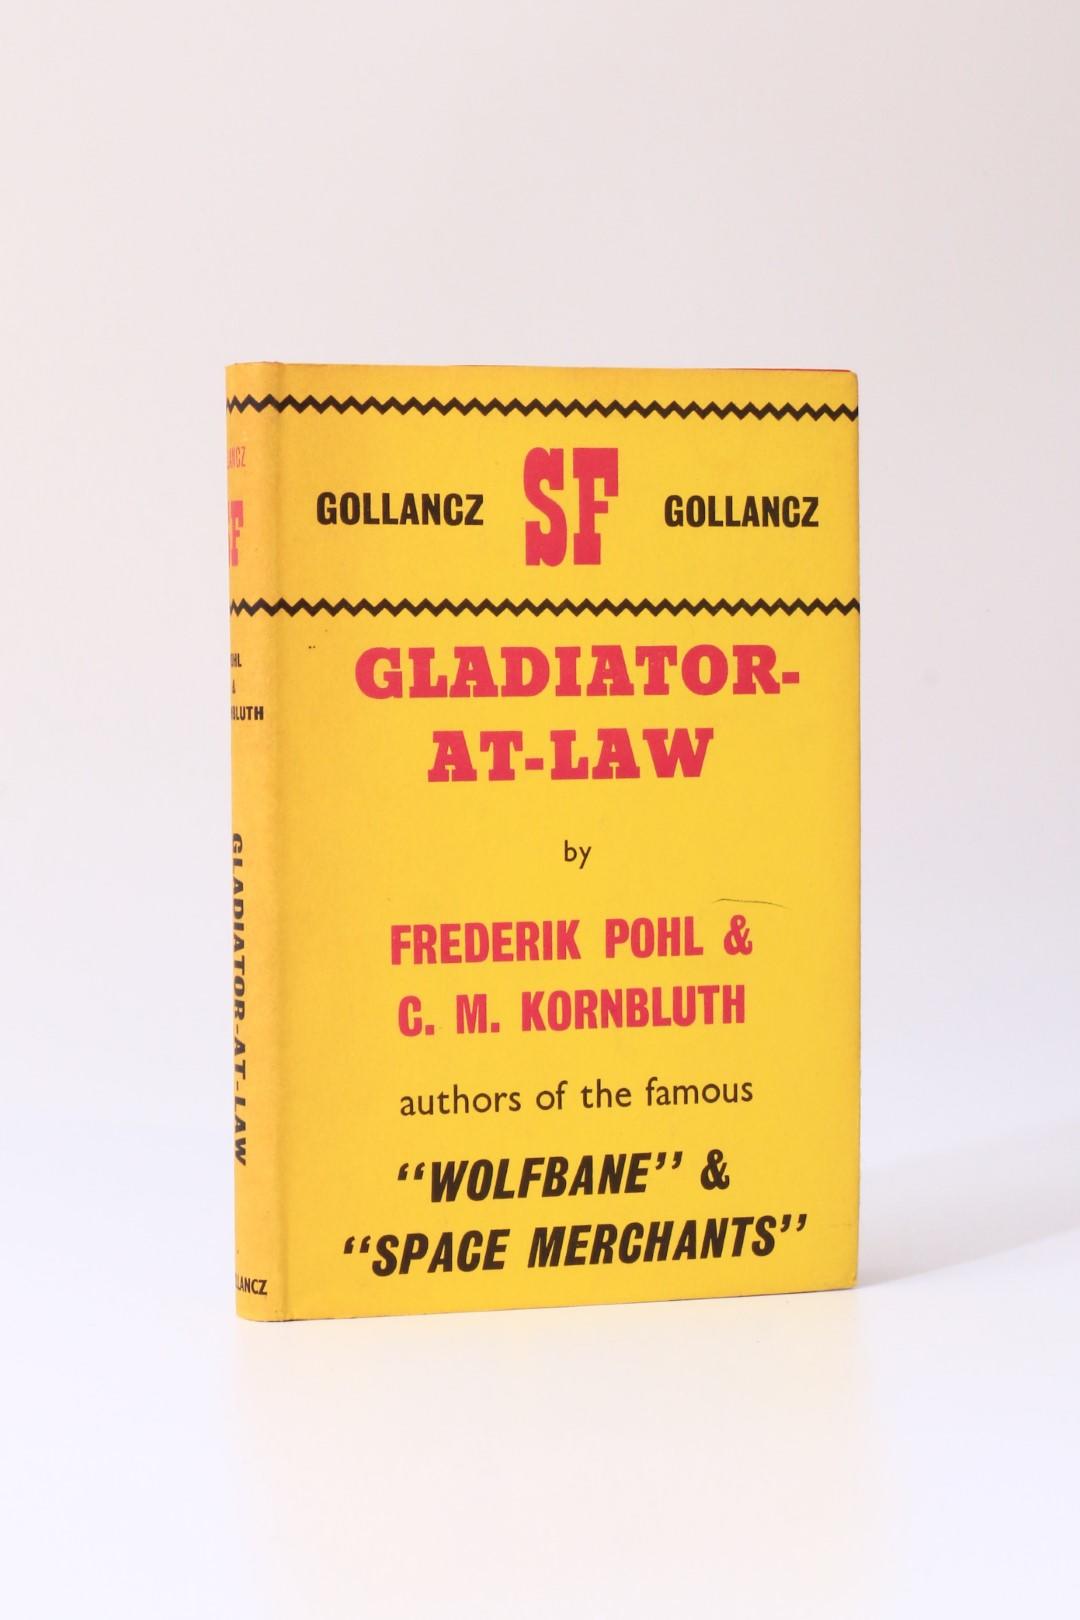 Frederik Pohl & C.M. Kornbluth - Gladiator-At-Law - Gollancz, 1964, Signed First Edition.